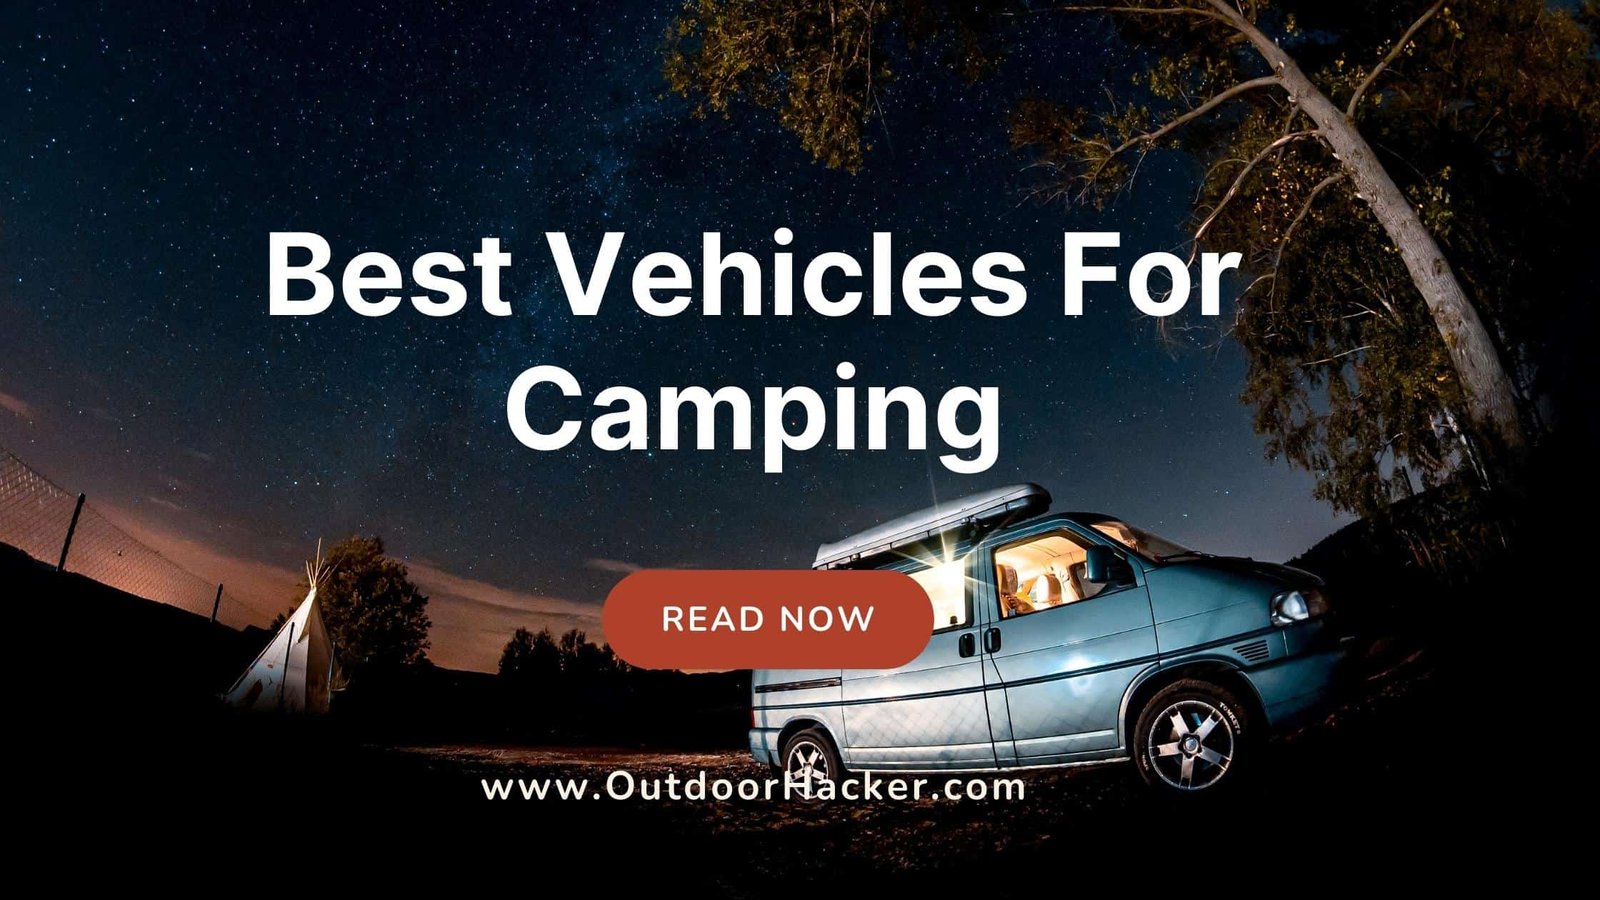 Best Vehicles For Camping